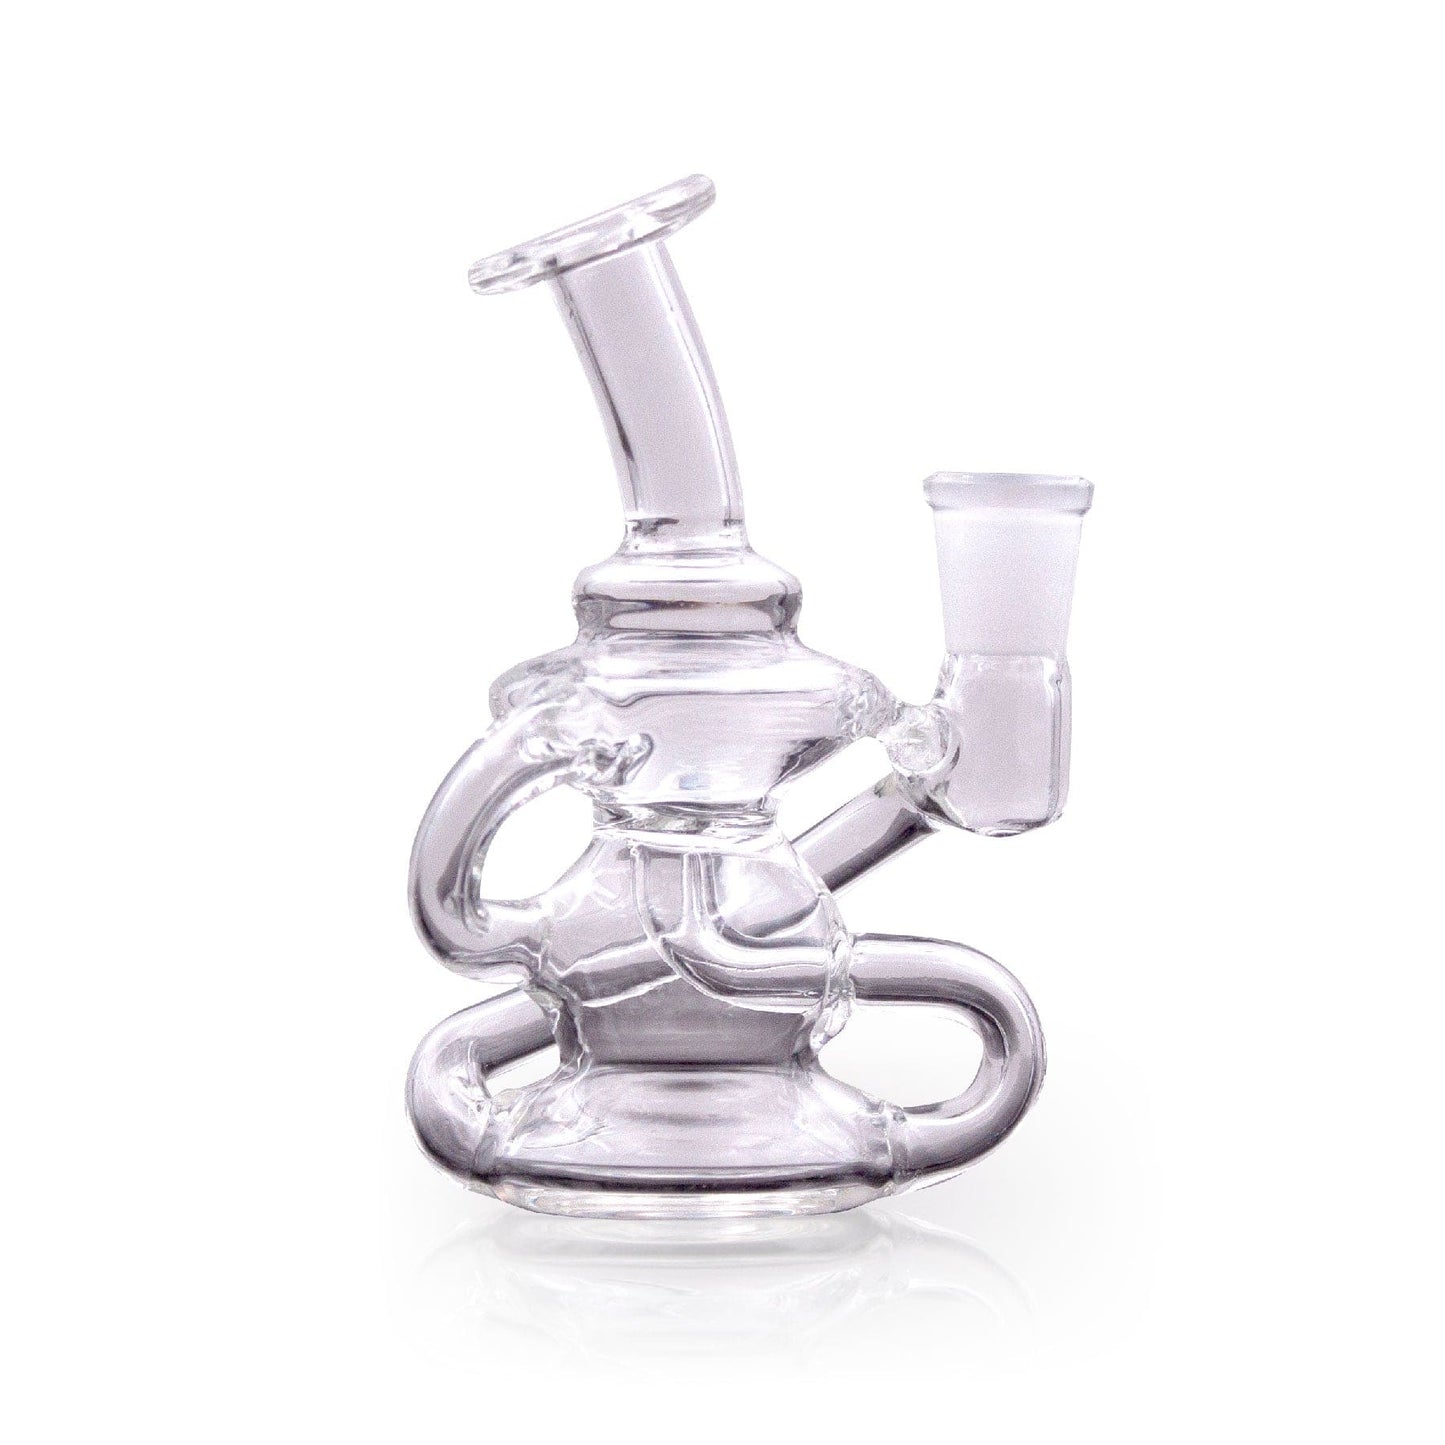 Klein Recycler Mini Rig: Big Performance in a Compact Design